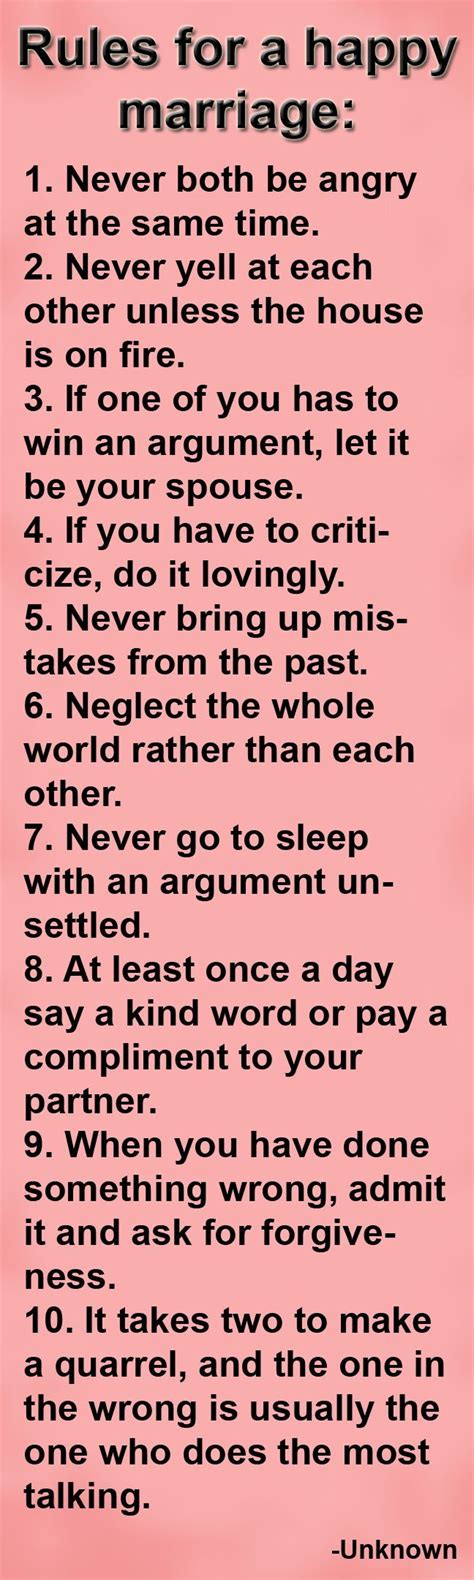 Rules For A Happy Marriage Pictures Photos And Images For Facebook